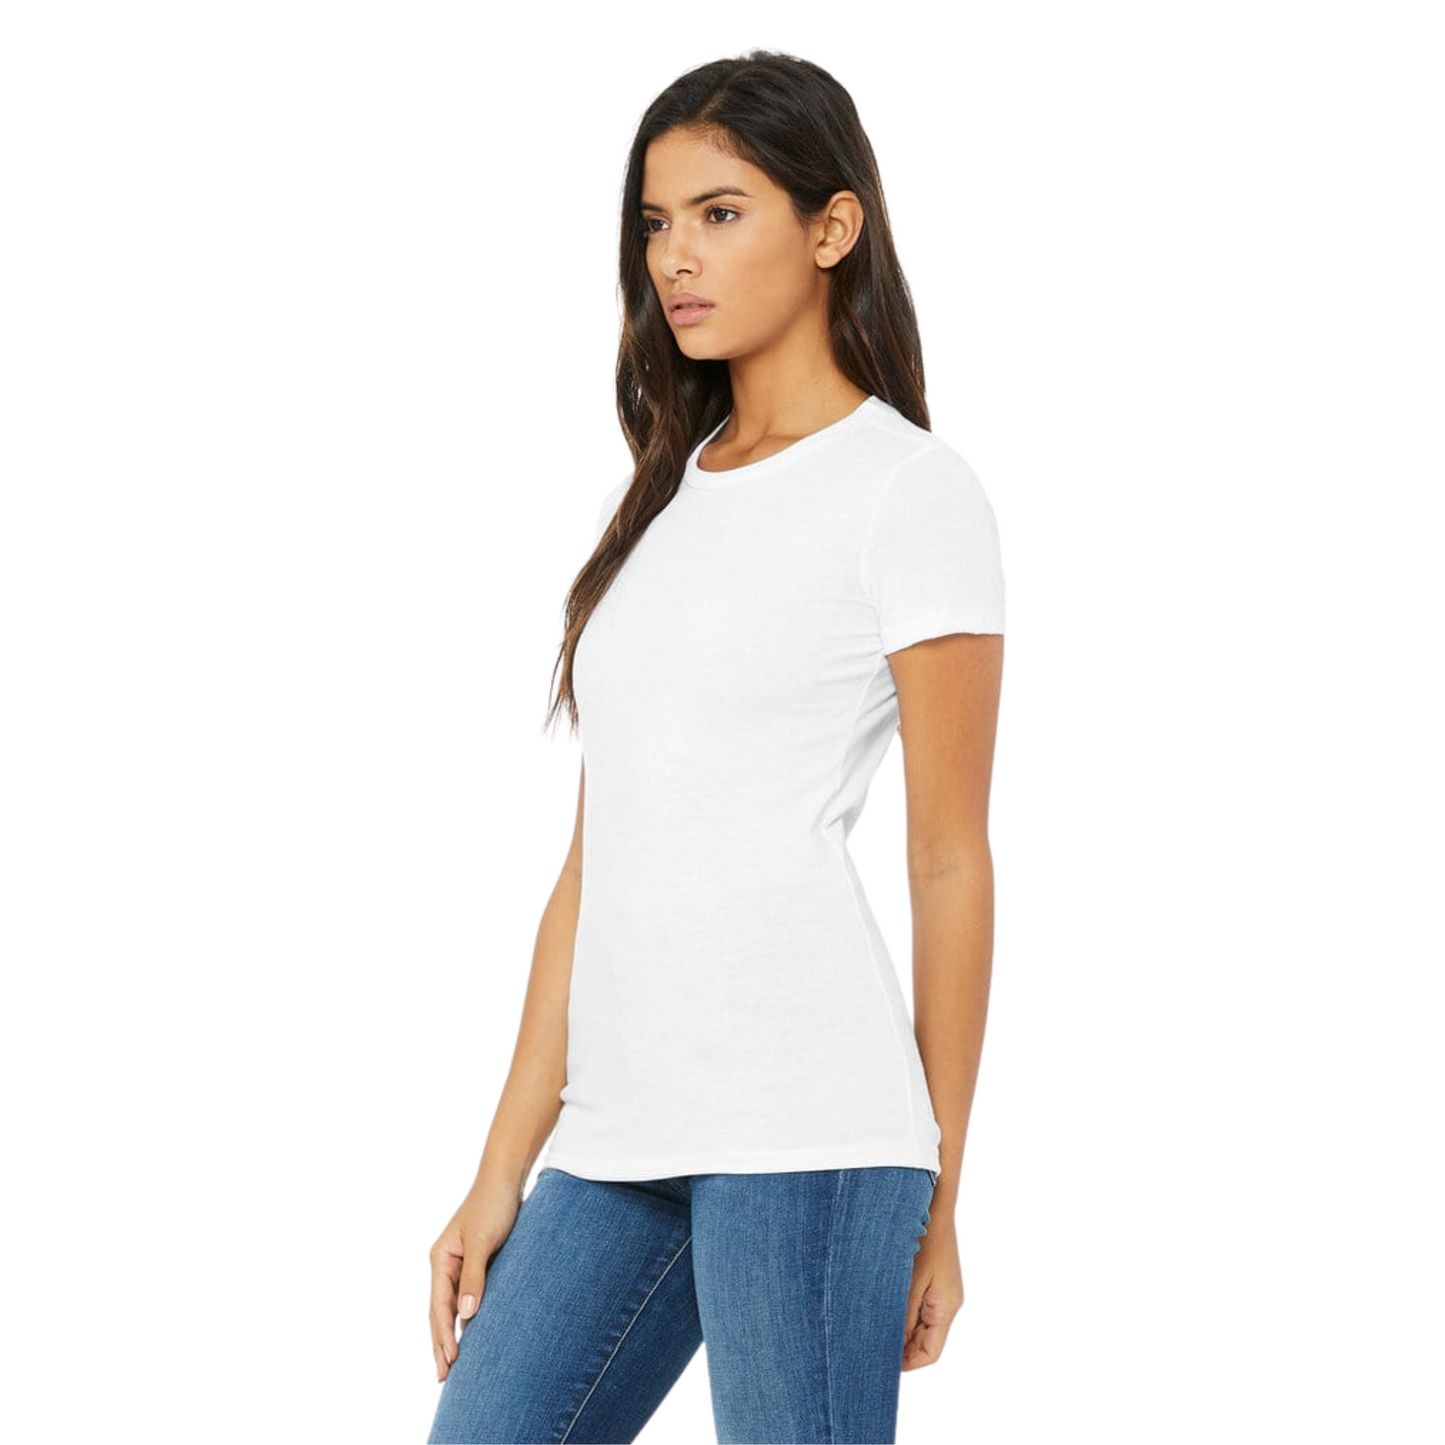 Women's Favourite Tee - Solid White Triblend